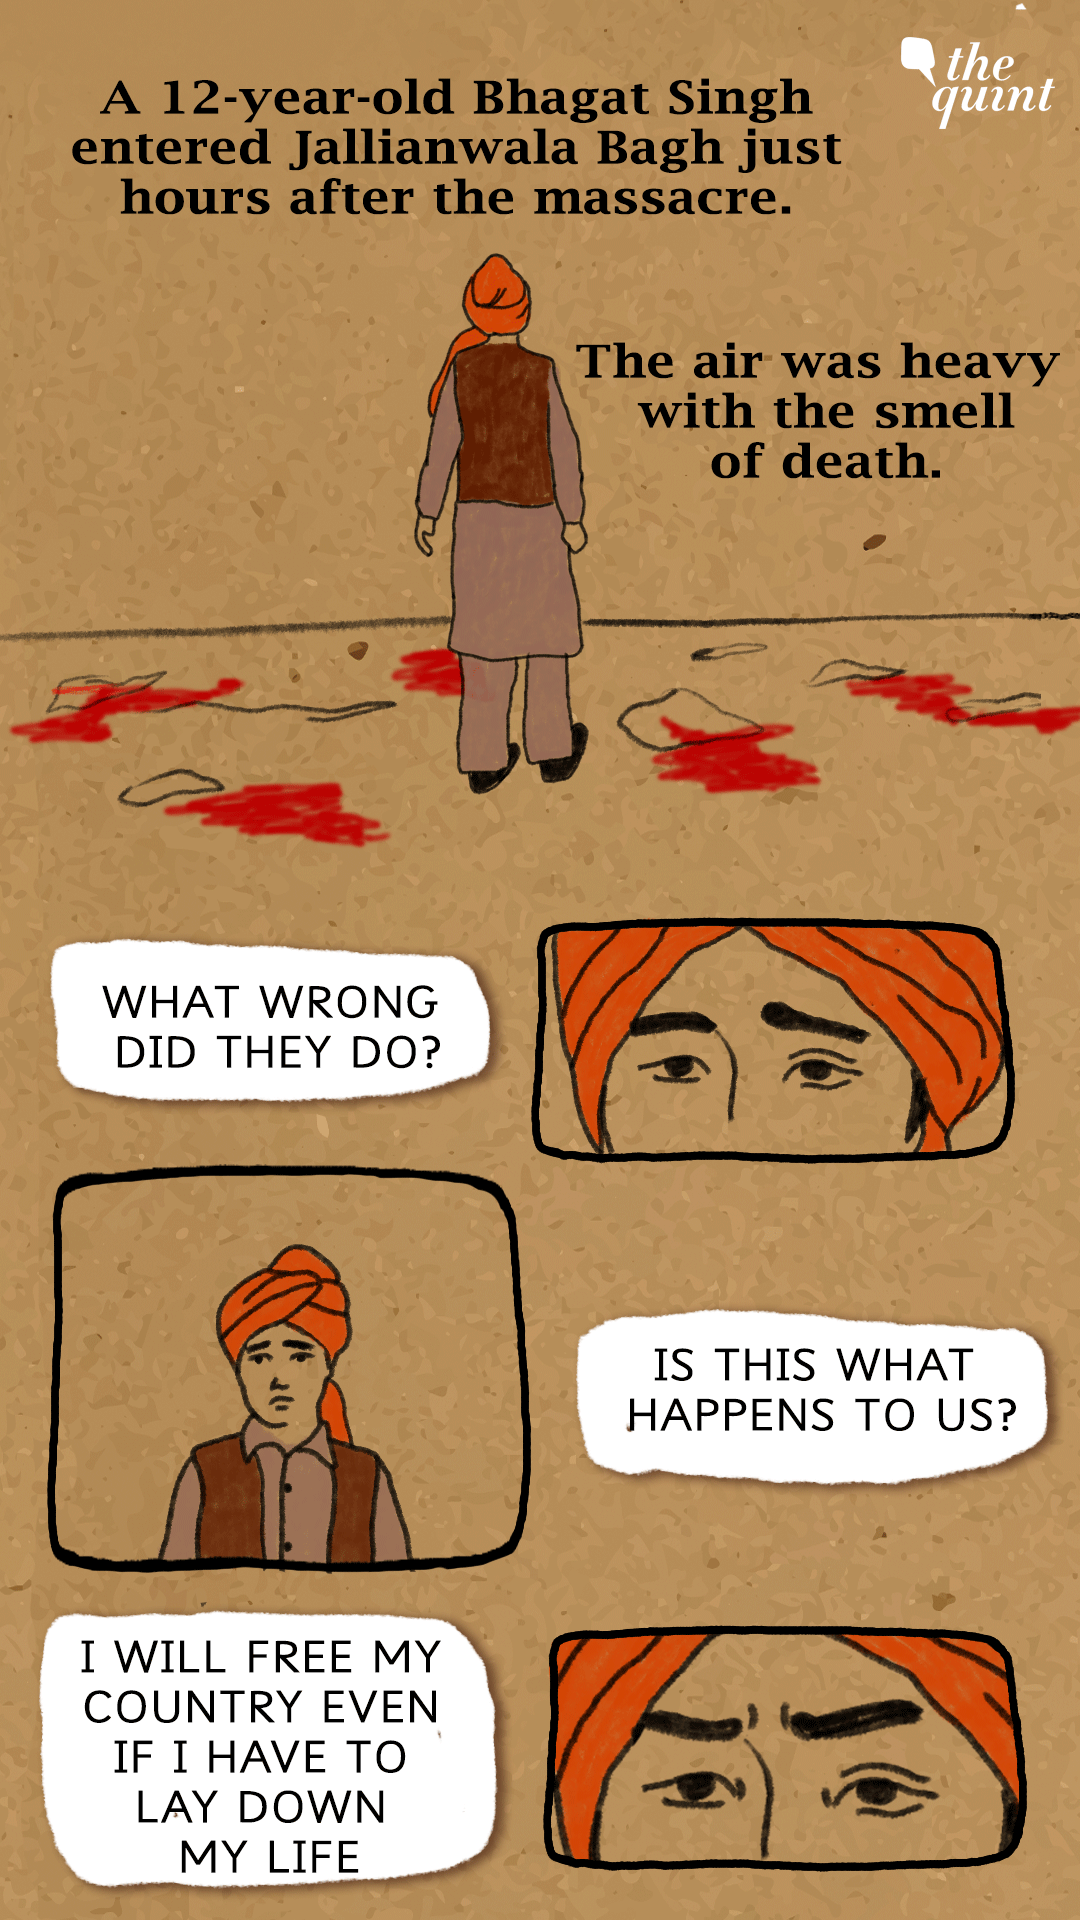 On Martyrs’ Day, a graphic novel about the life of the revolutionary freedom fighter.